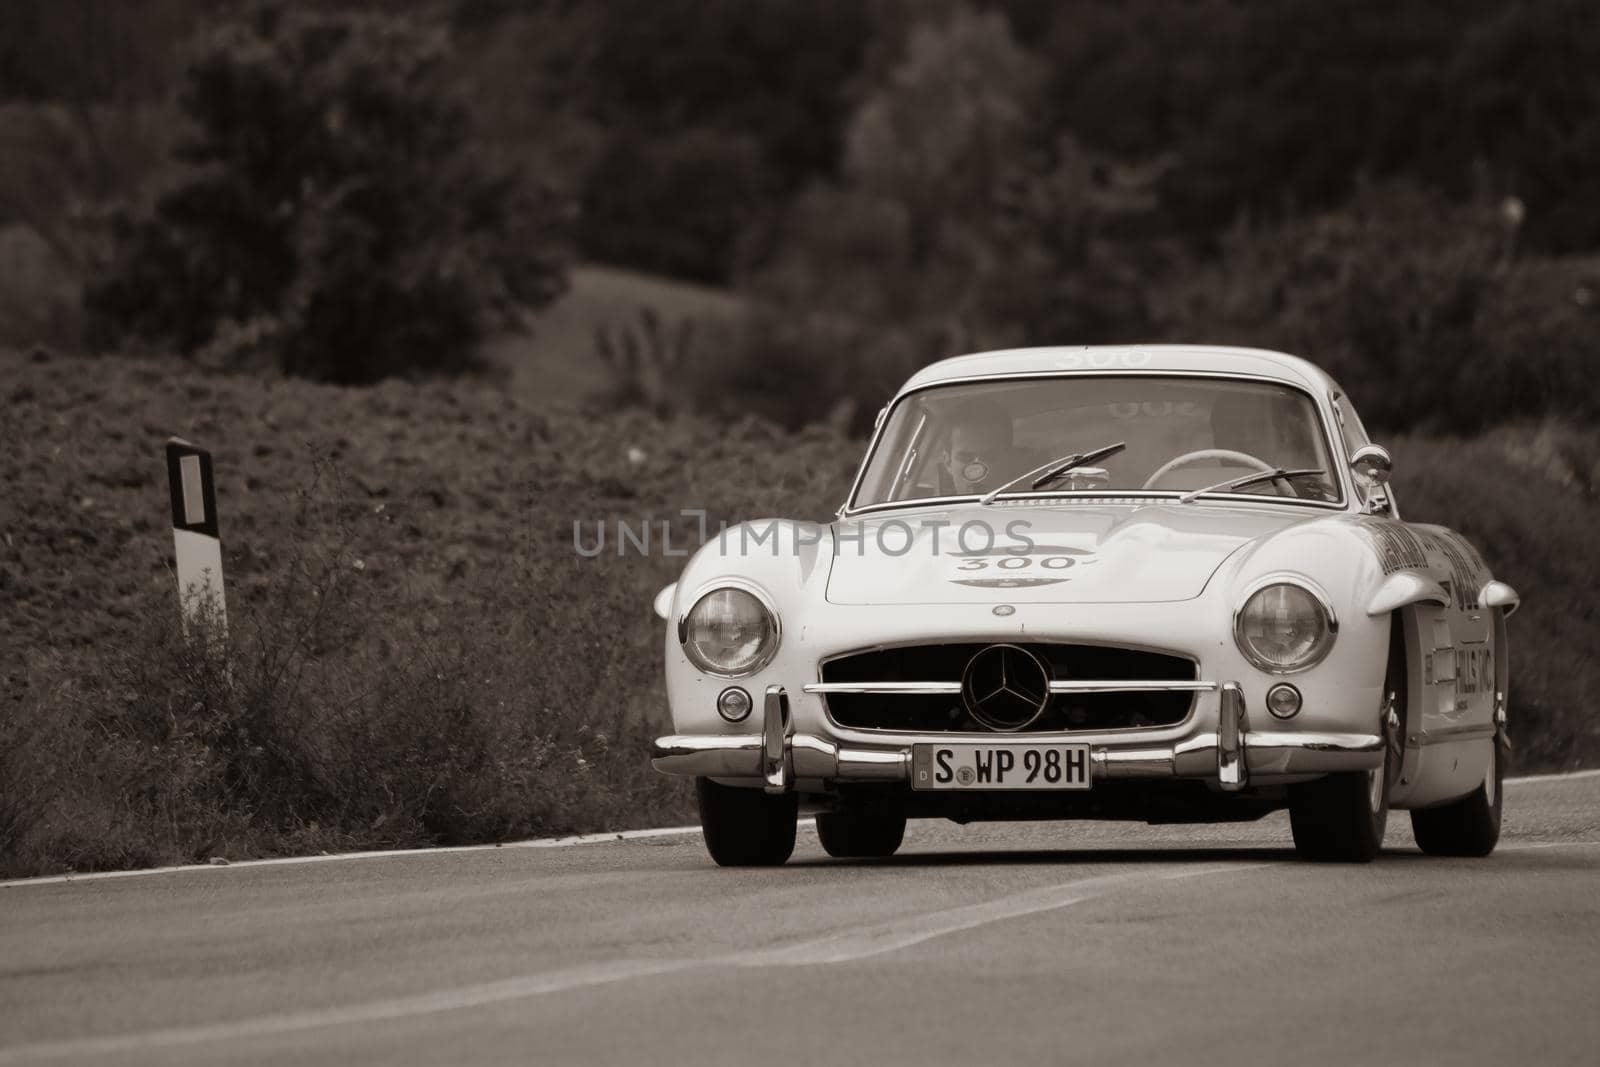 MERCEDES-BENZ 300 SL W 198 1954 on an old racing car in rally Mille Miglia 2020 the famous italian historical race (1927-1957) by massimocampanari